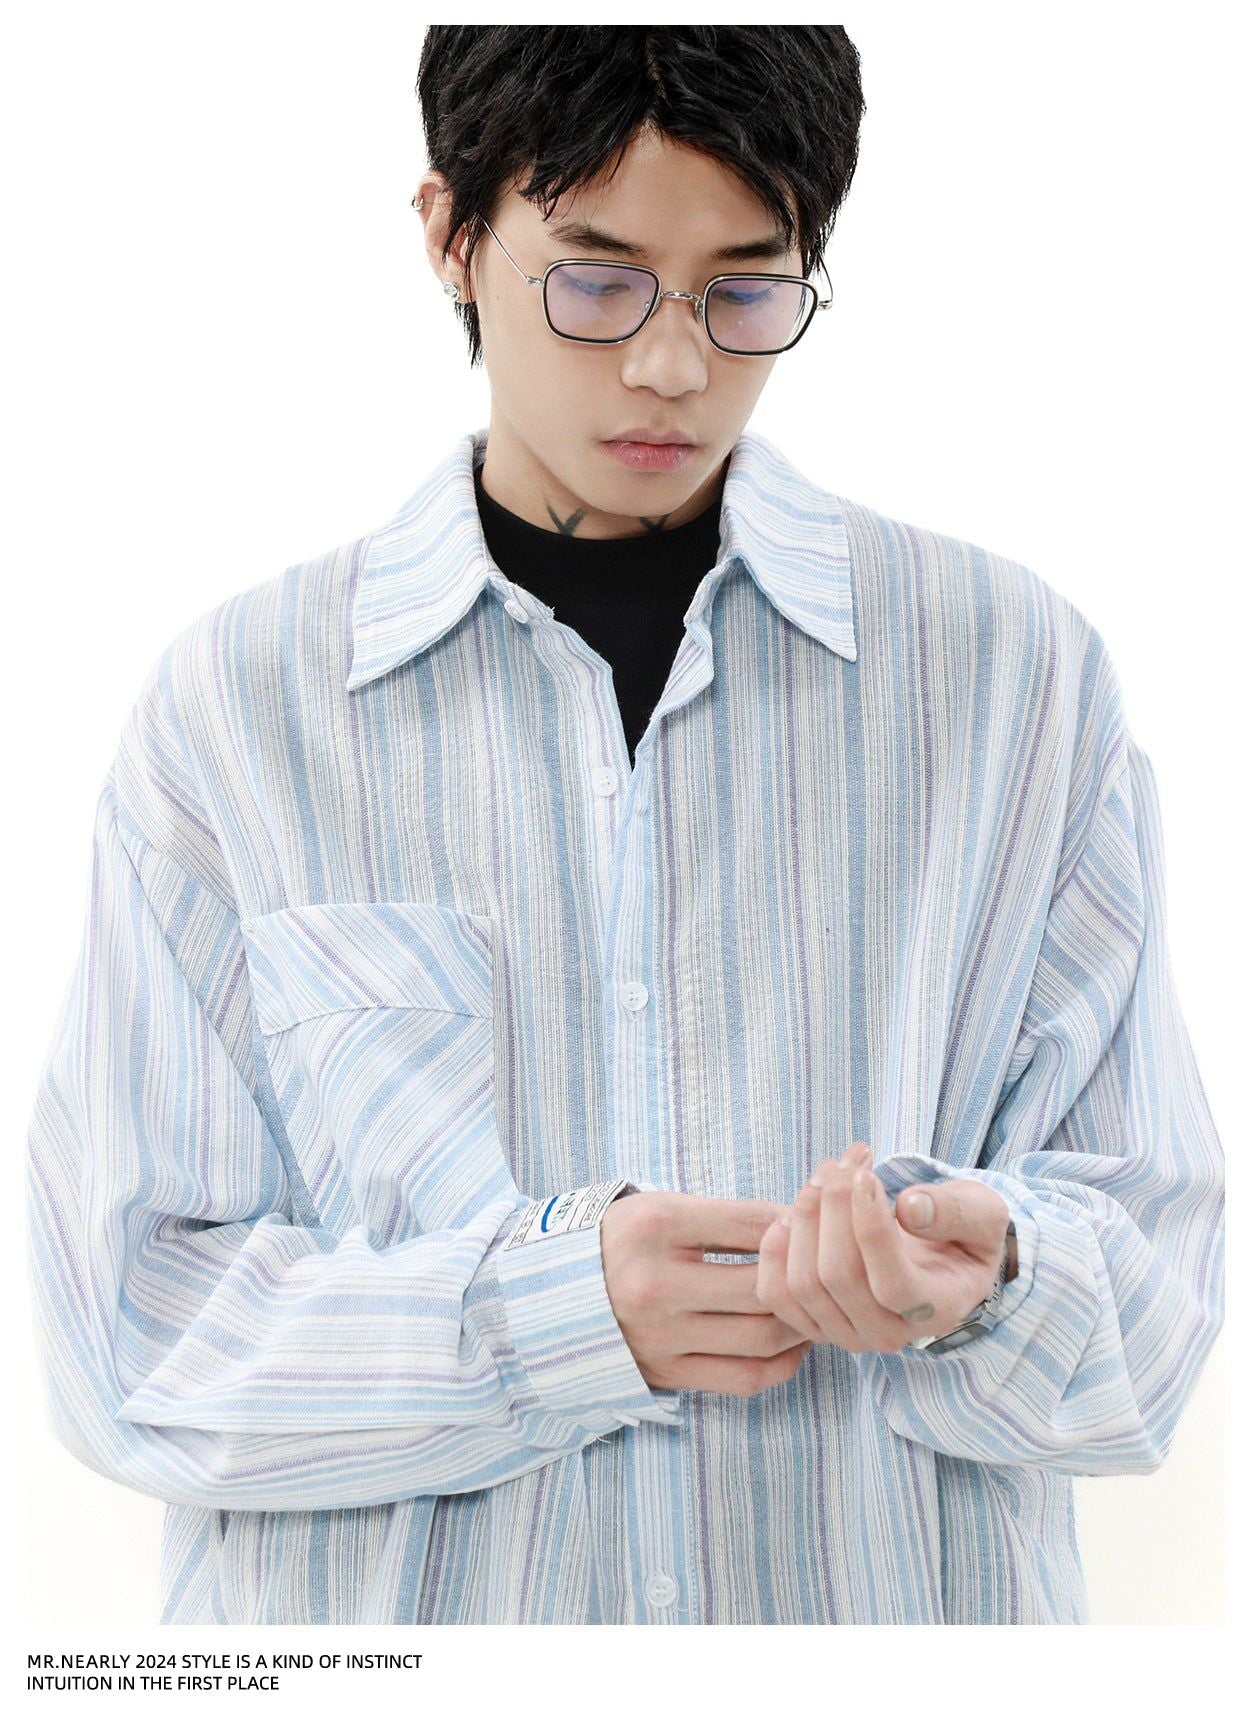 Contrast Striped Pocket Shirt Korean Street Fashion Shirt By Mr Nearly Shop Online at OH Vault